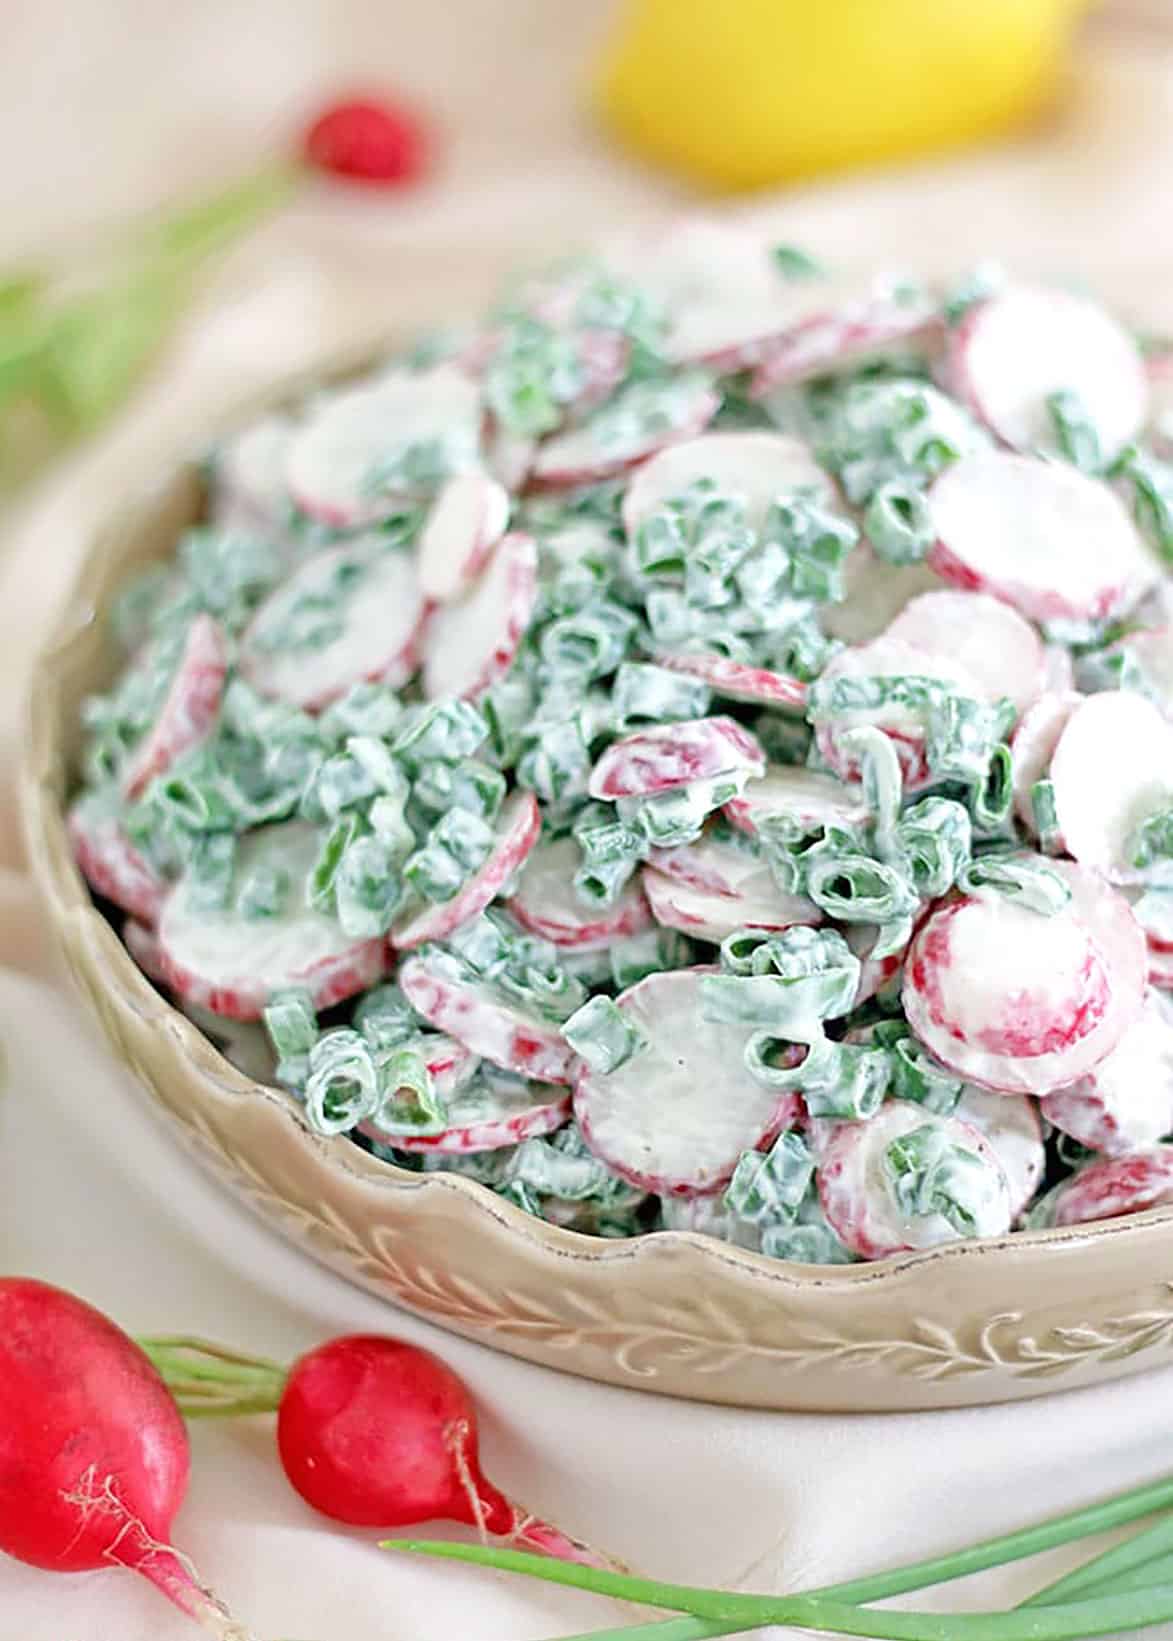 This radish salad with yogurt dressing is a recipe that perfectly combines convenience, simplicity, and incredible flavor. 